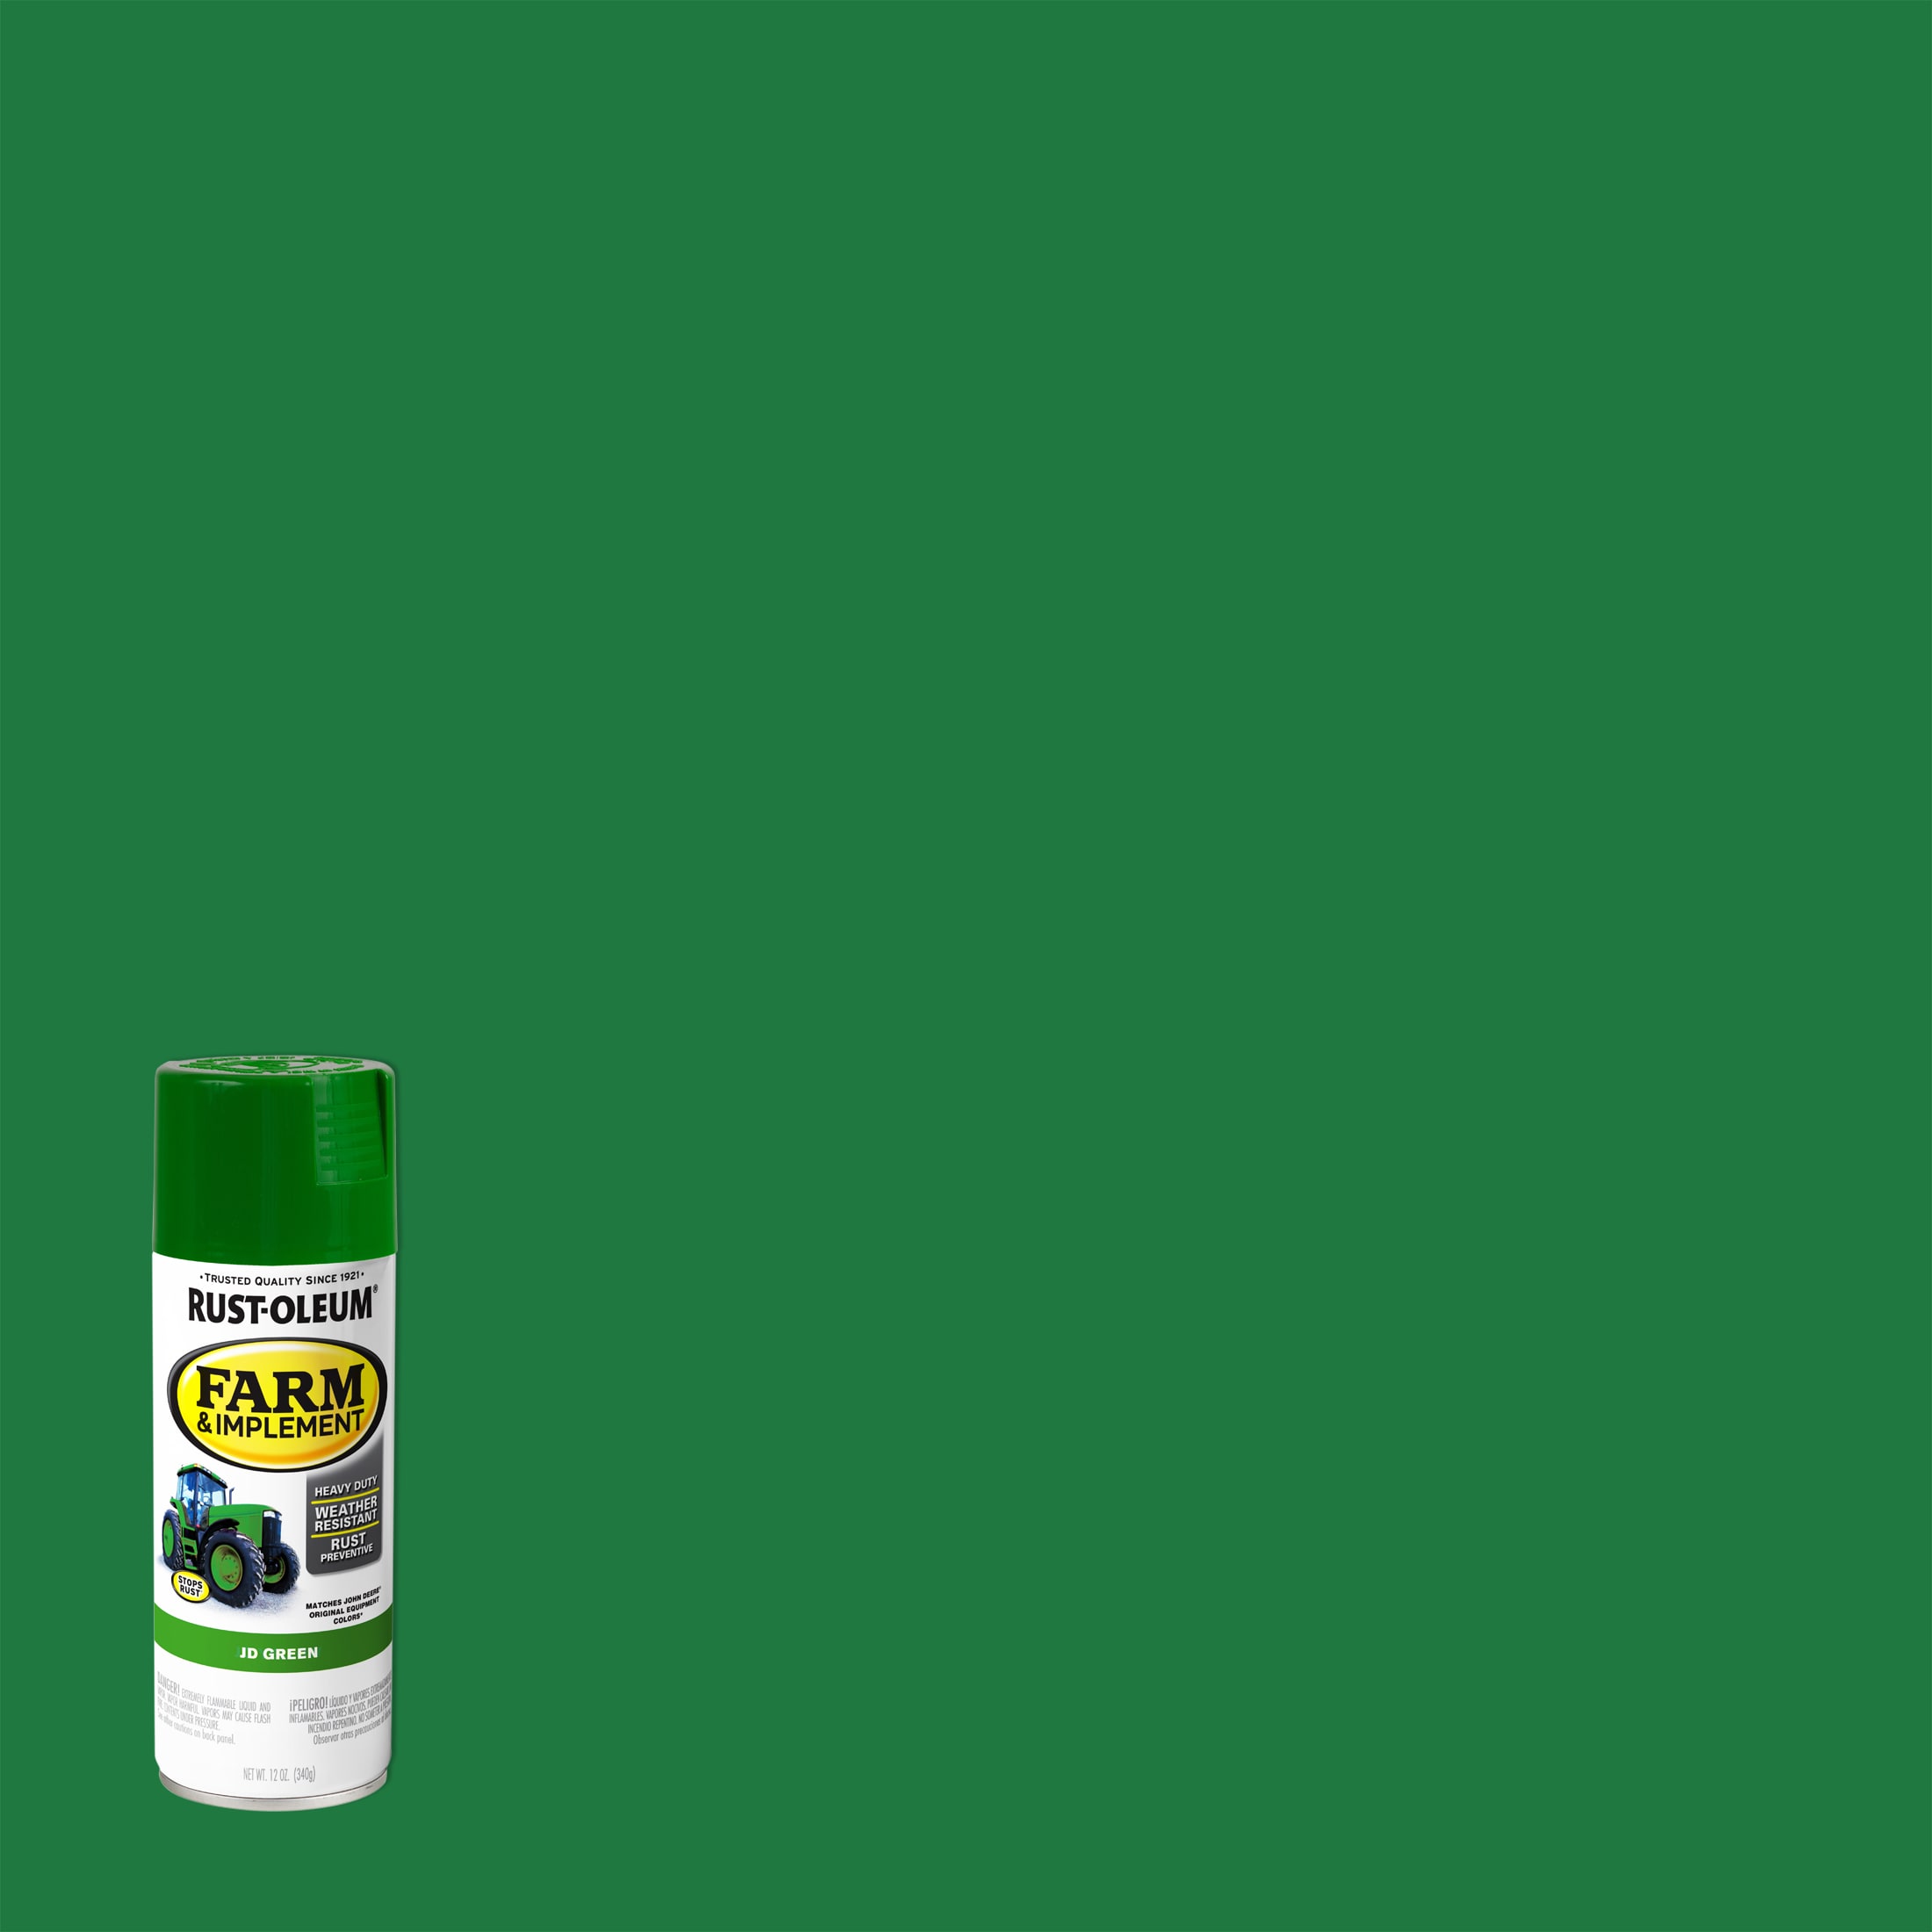 Spring Green Synthetic Enamel Paints - 152 - Spring Green Paint, Spring  Green Color, Aksan Synthetic Paint, 99DF7D 